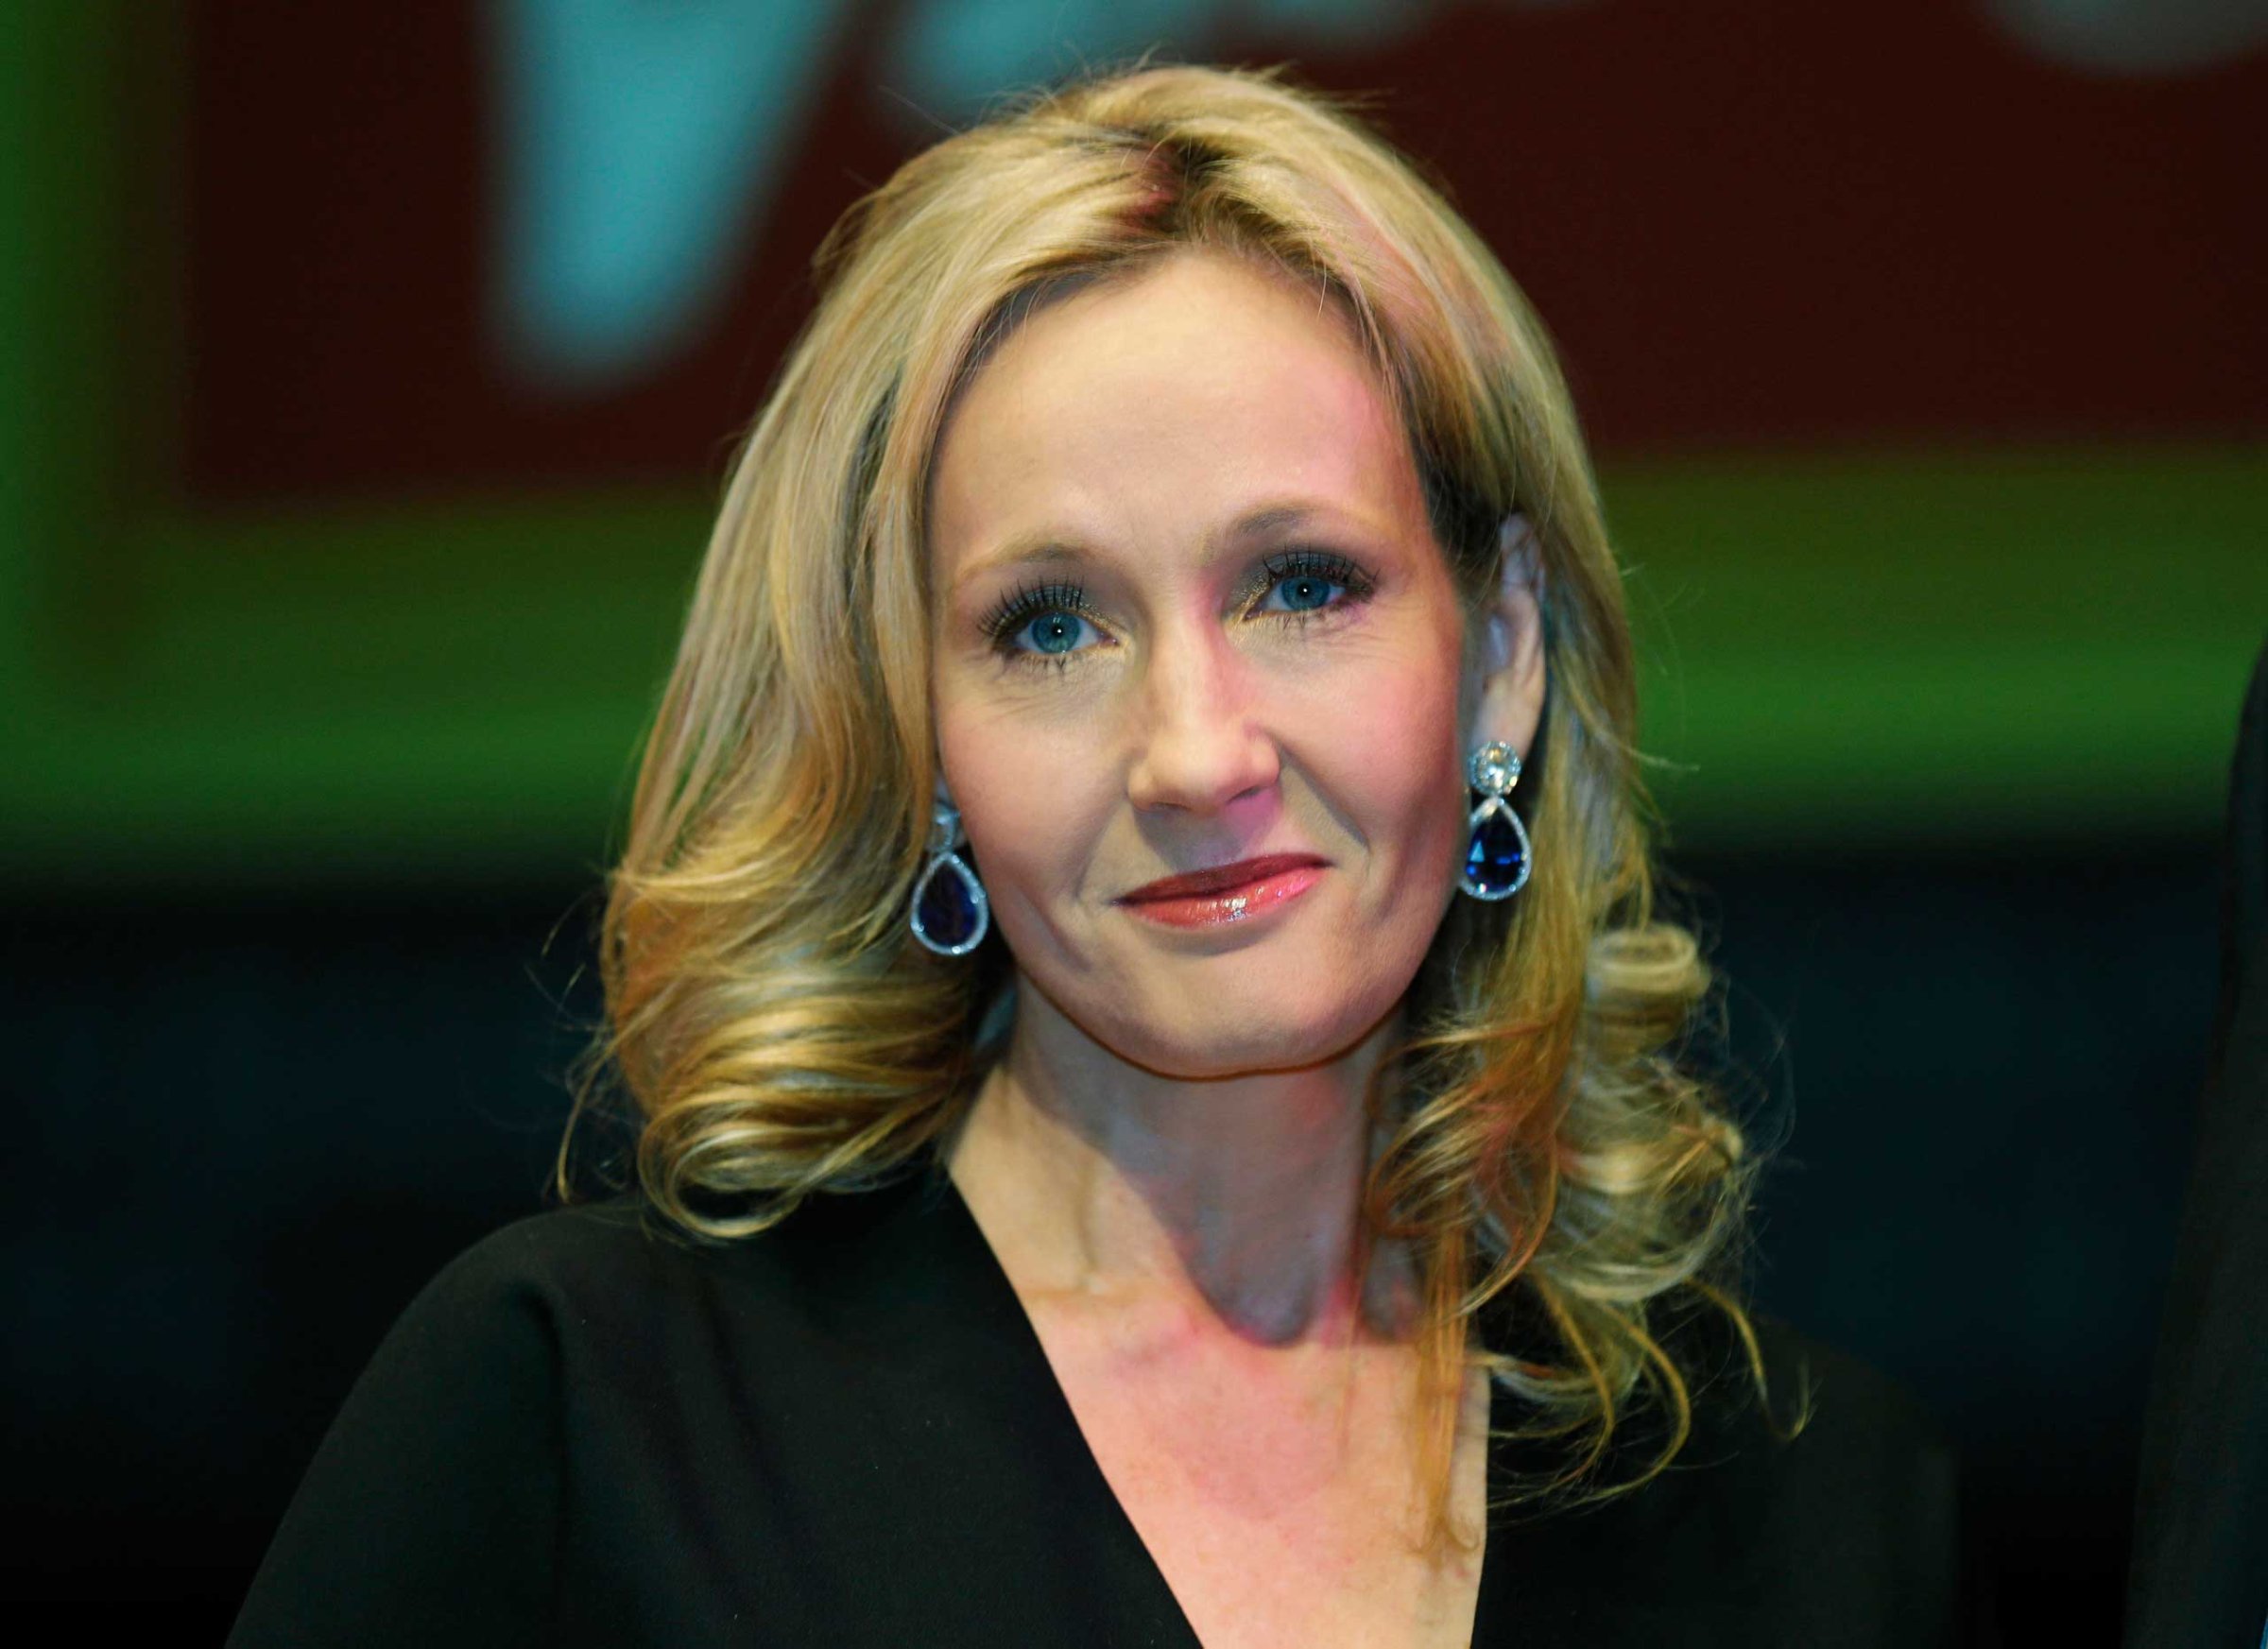 J.K. Rowling at the Southbank Centre in London in 2012.